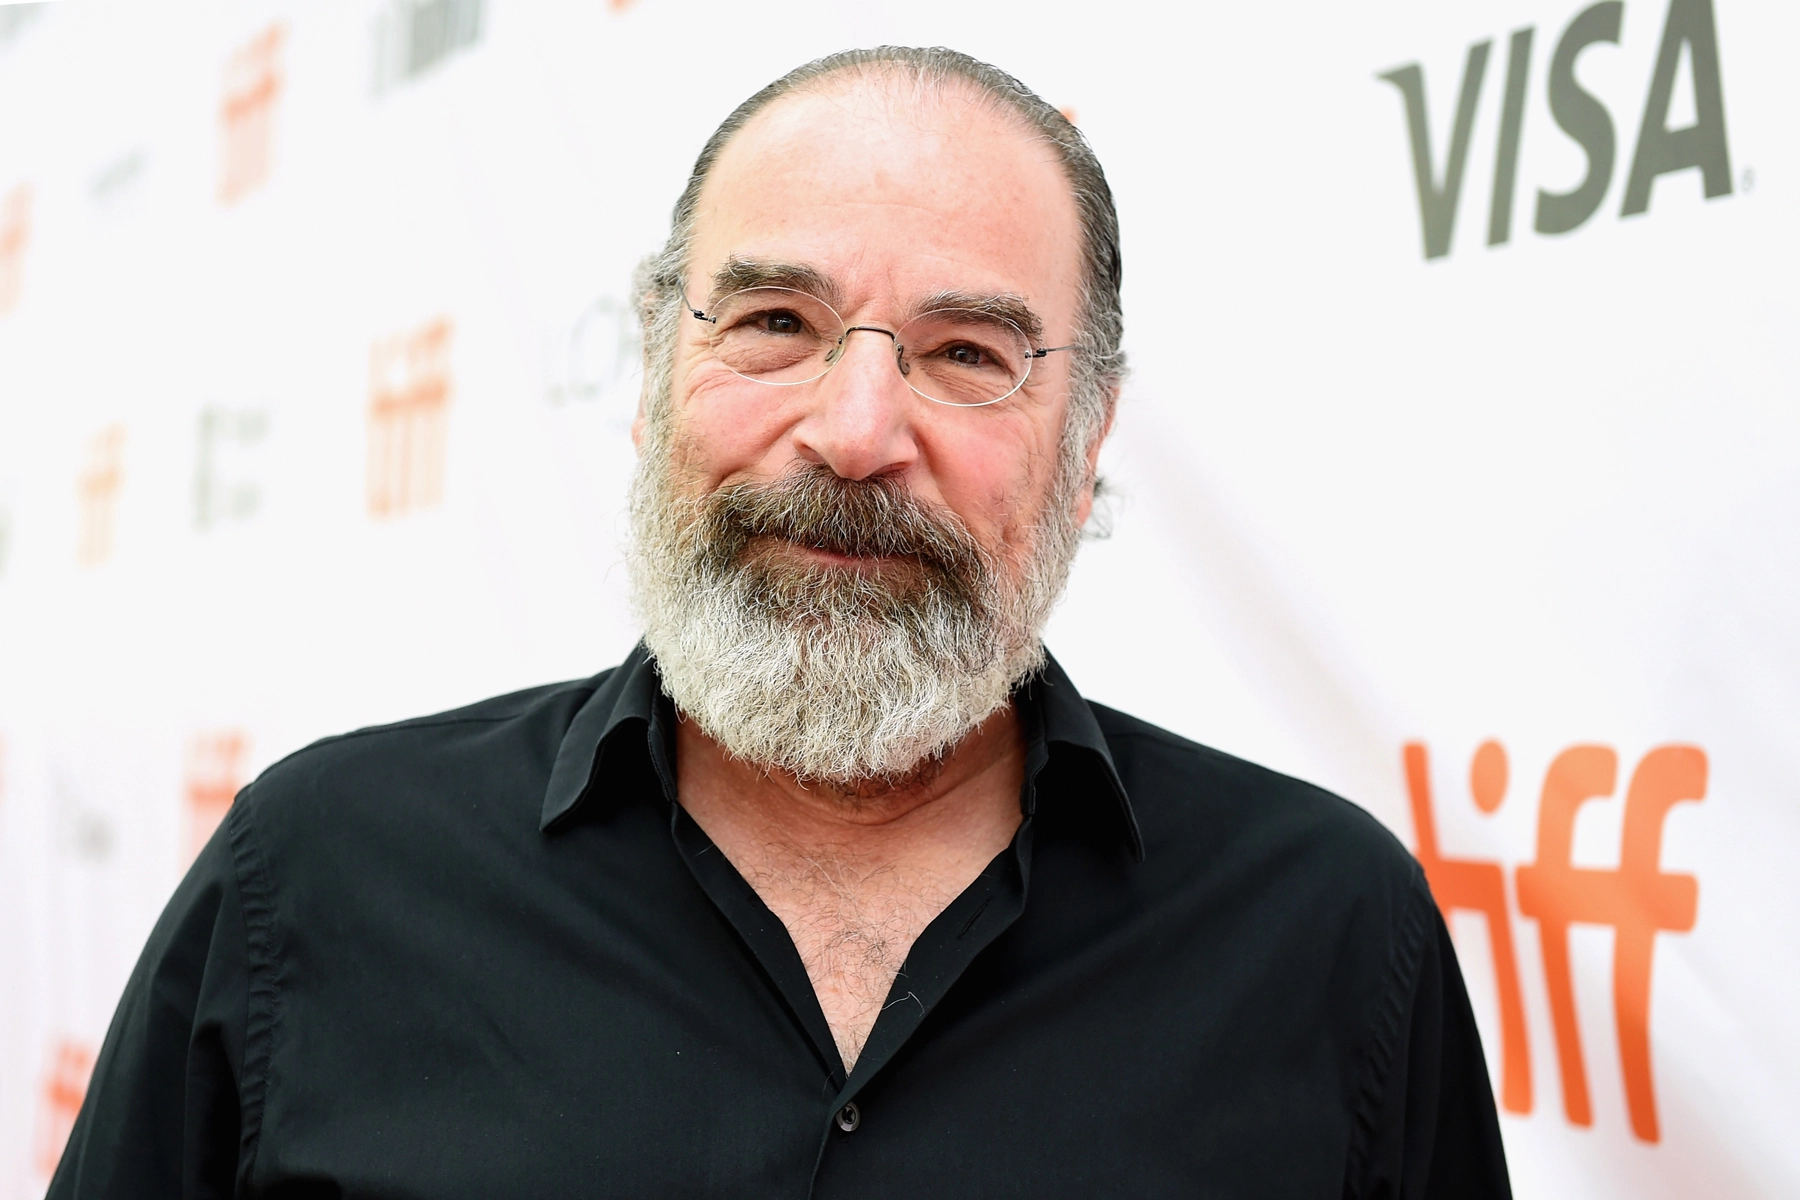 Mandy Patinkin has become more conscious of how his roles affect others